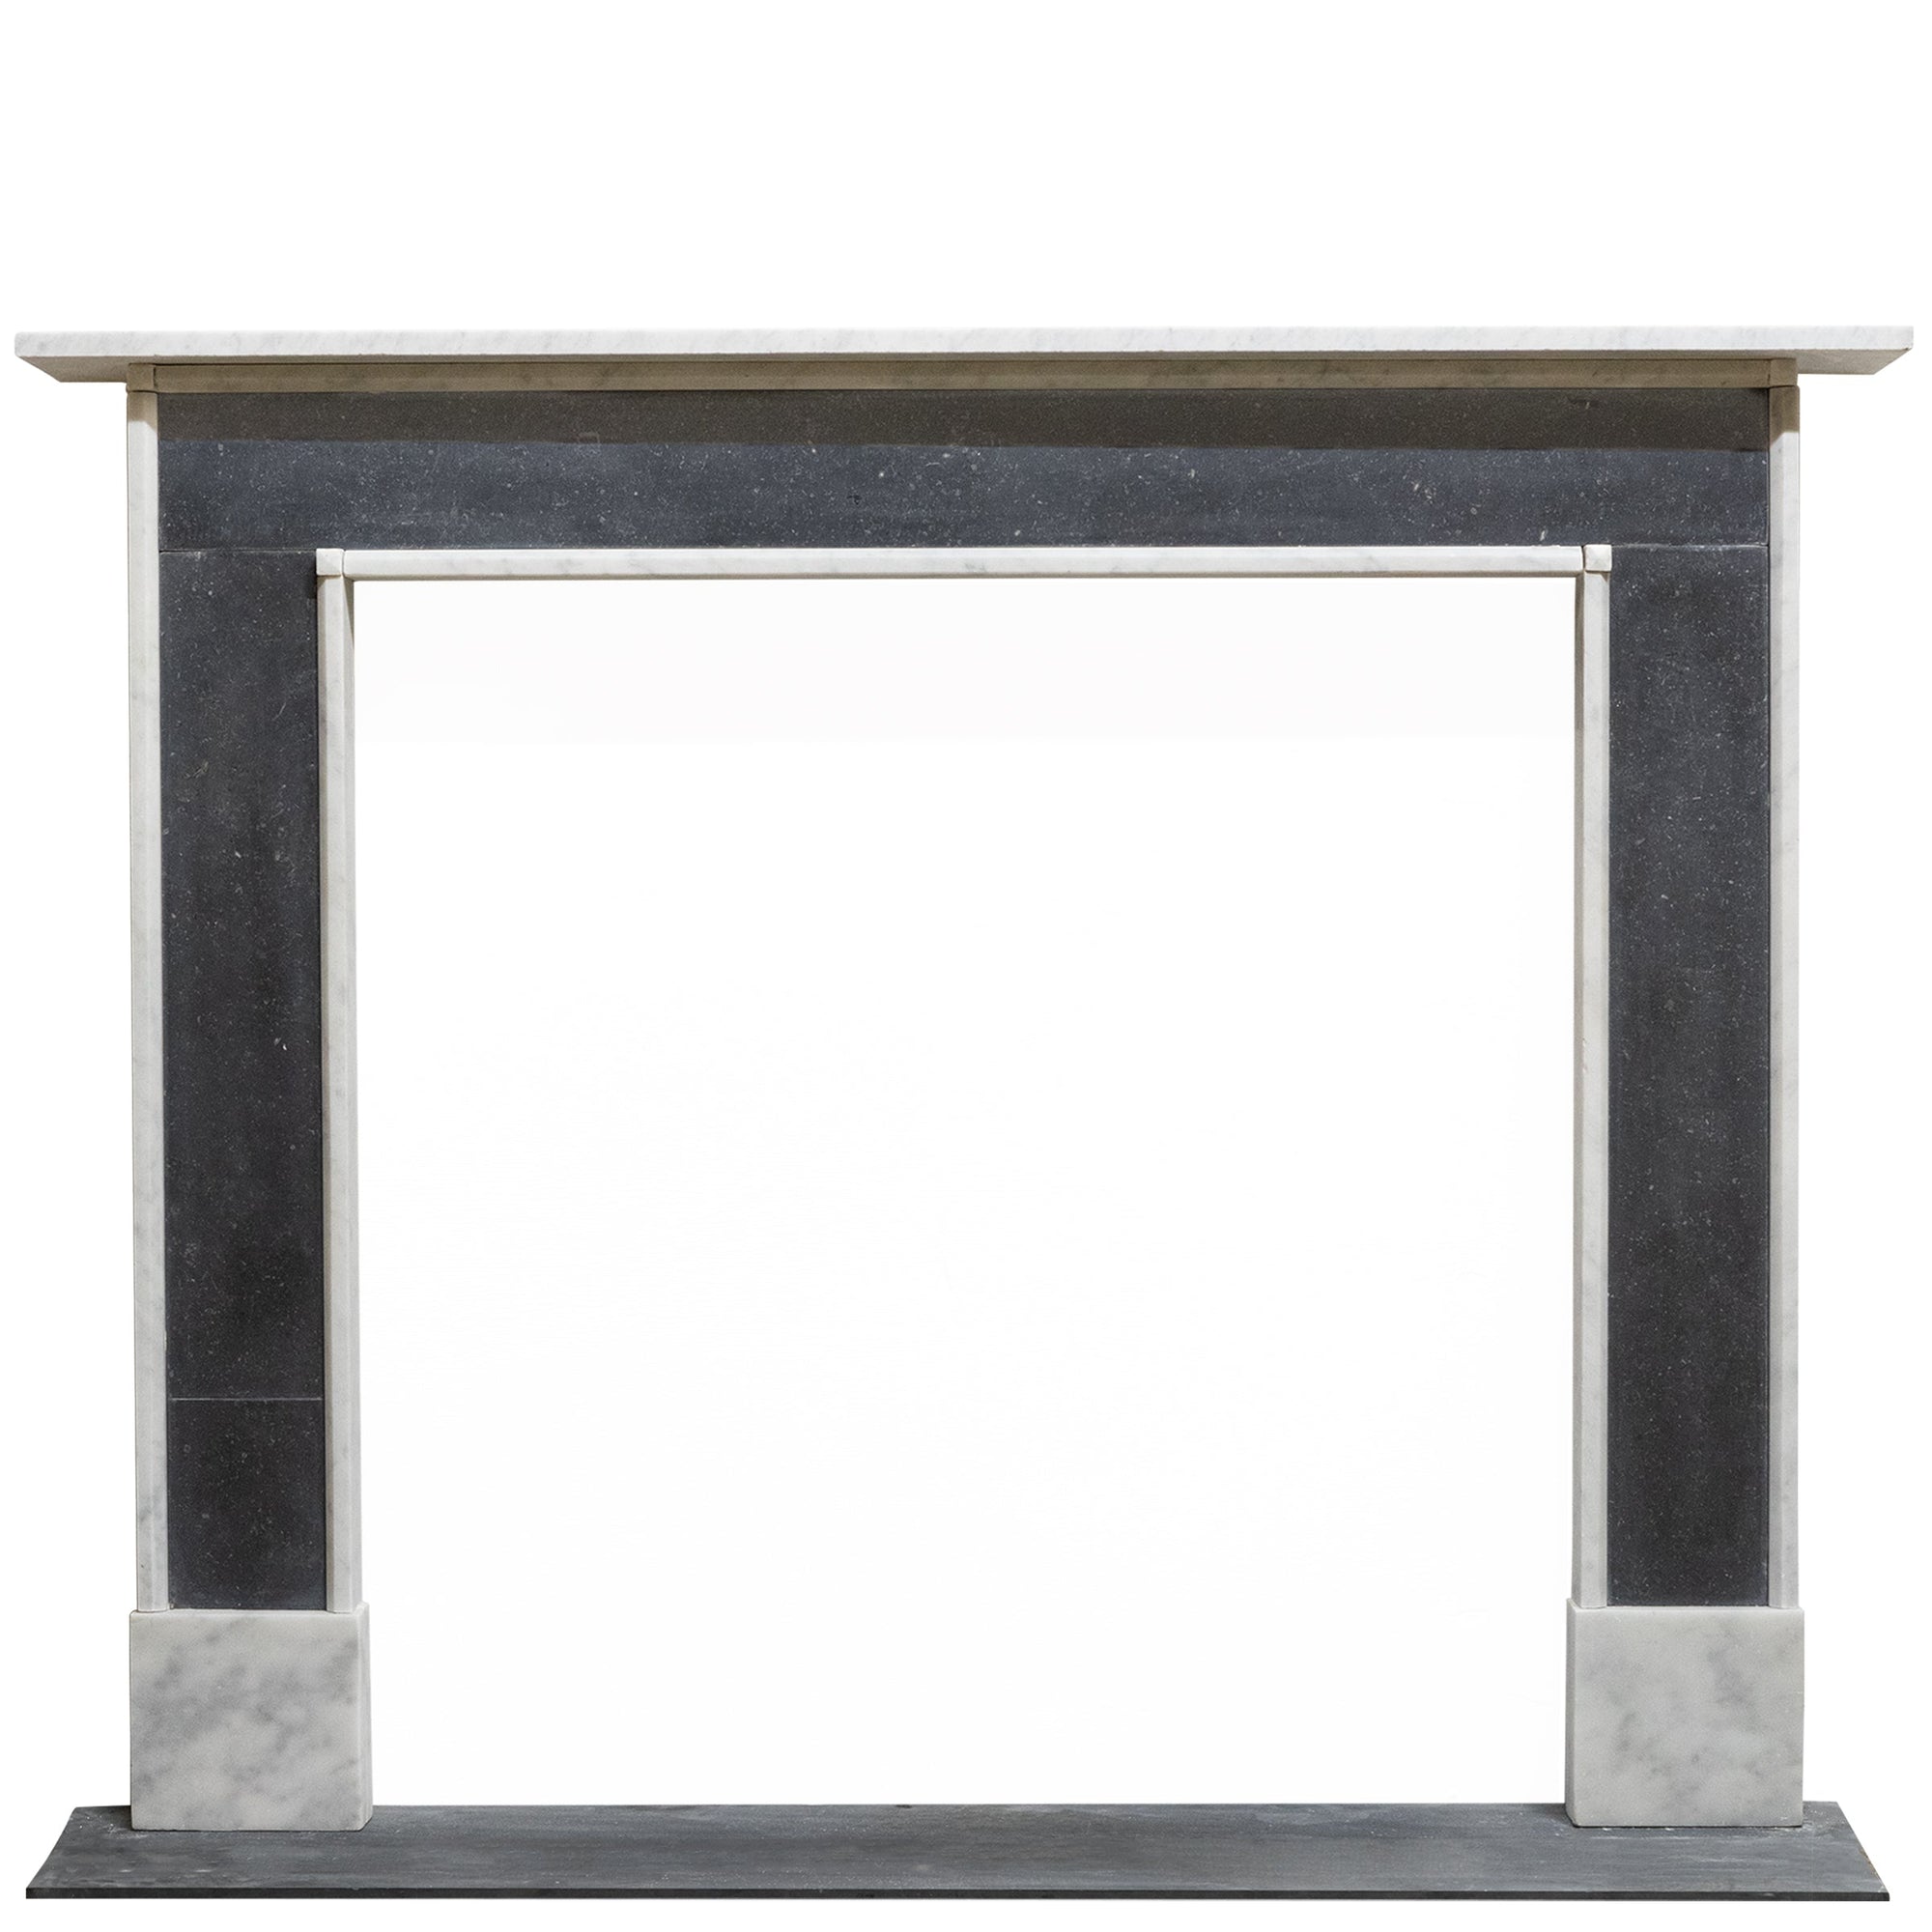 Regency Style Carrara & Black Marble Fireplace Surround | The Architectural Forum